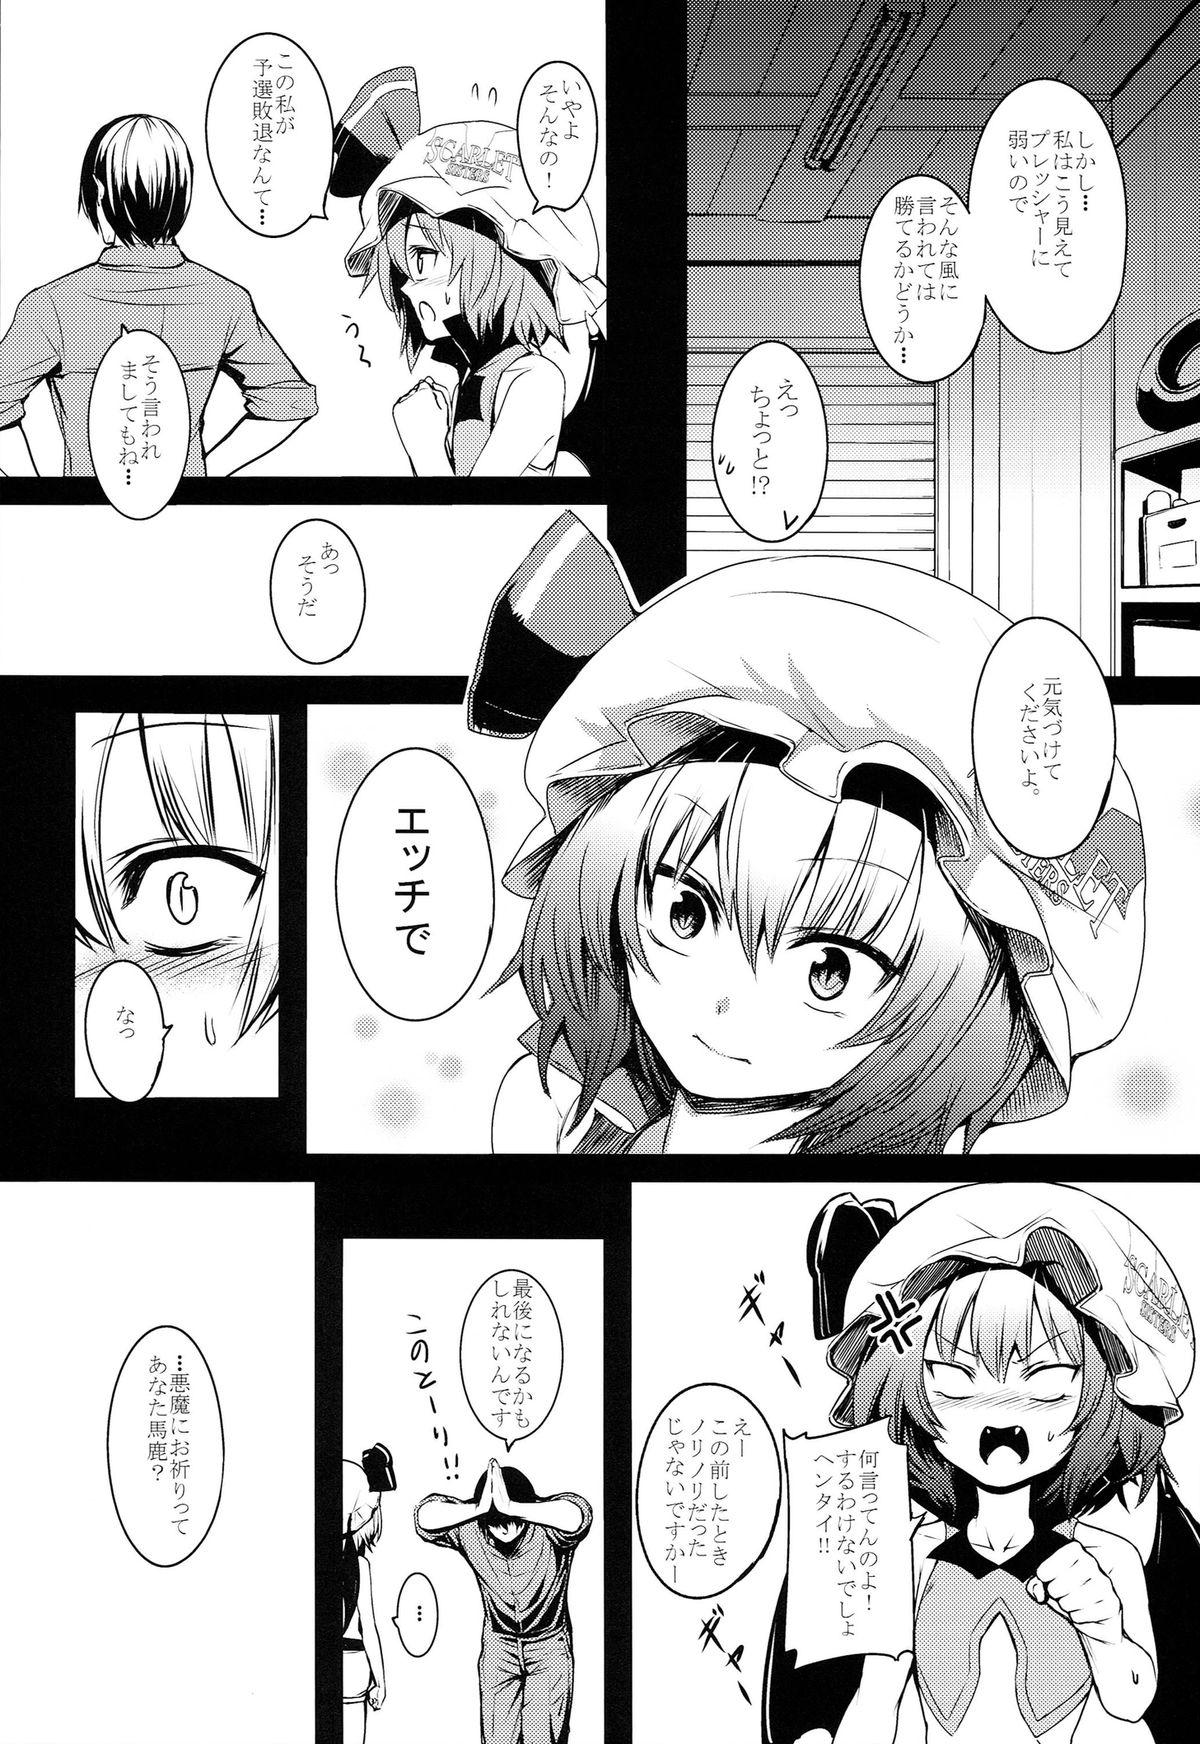 Cock Sucking TOUHOU RACE QUEENS COLLABO CLUB - Touhou project Nalgona - Page 5